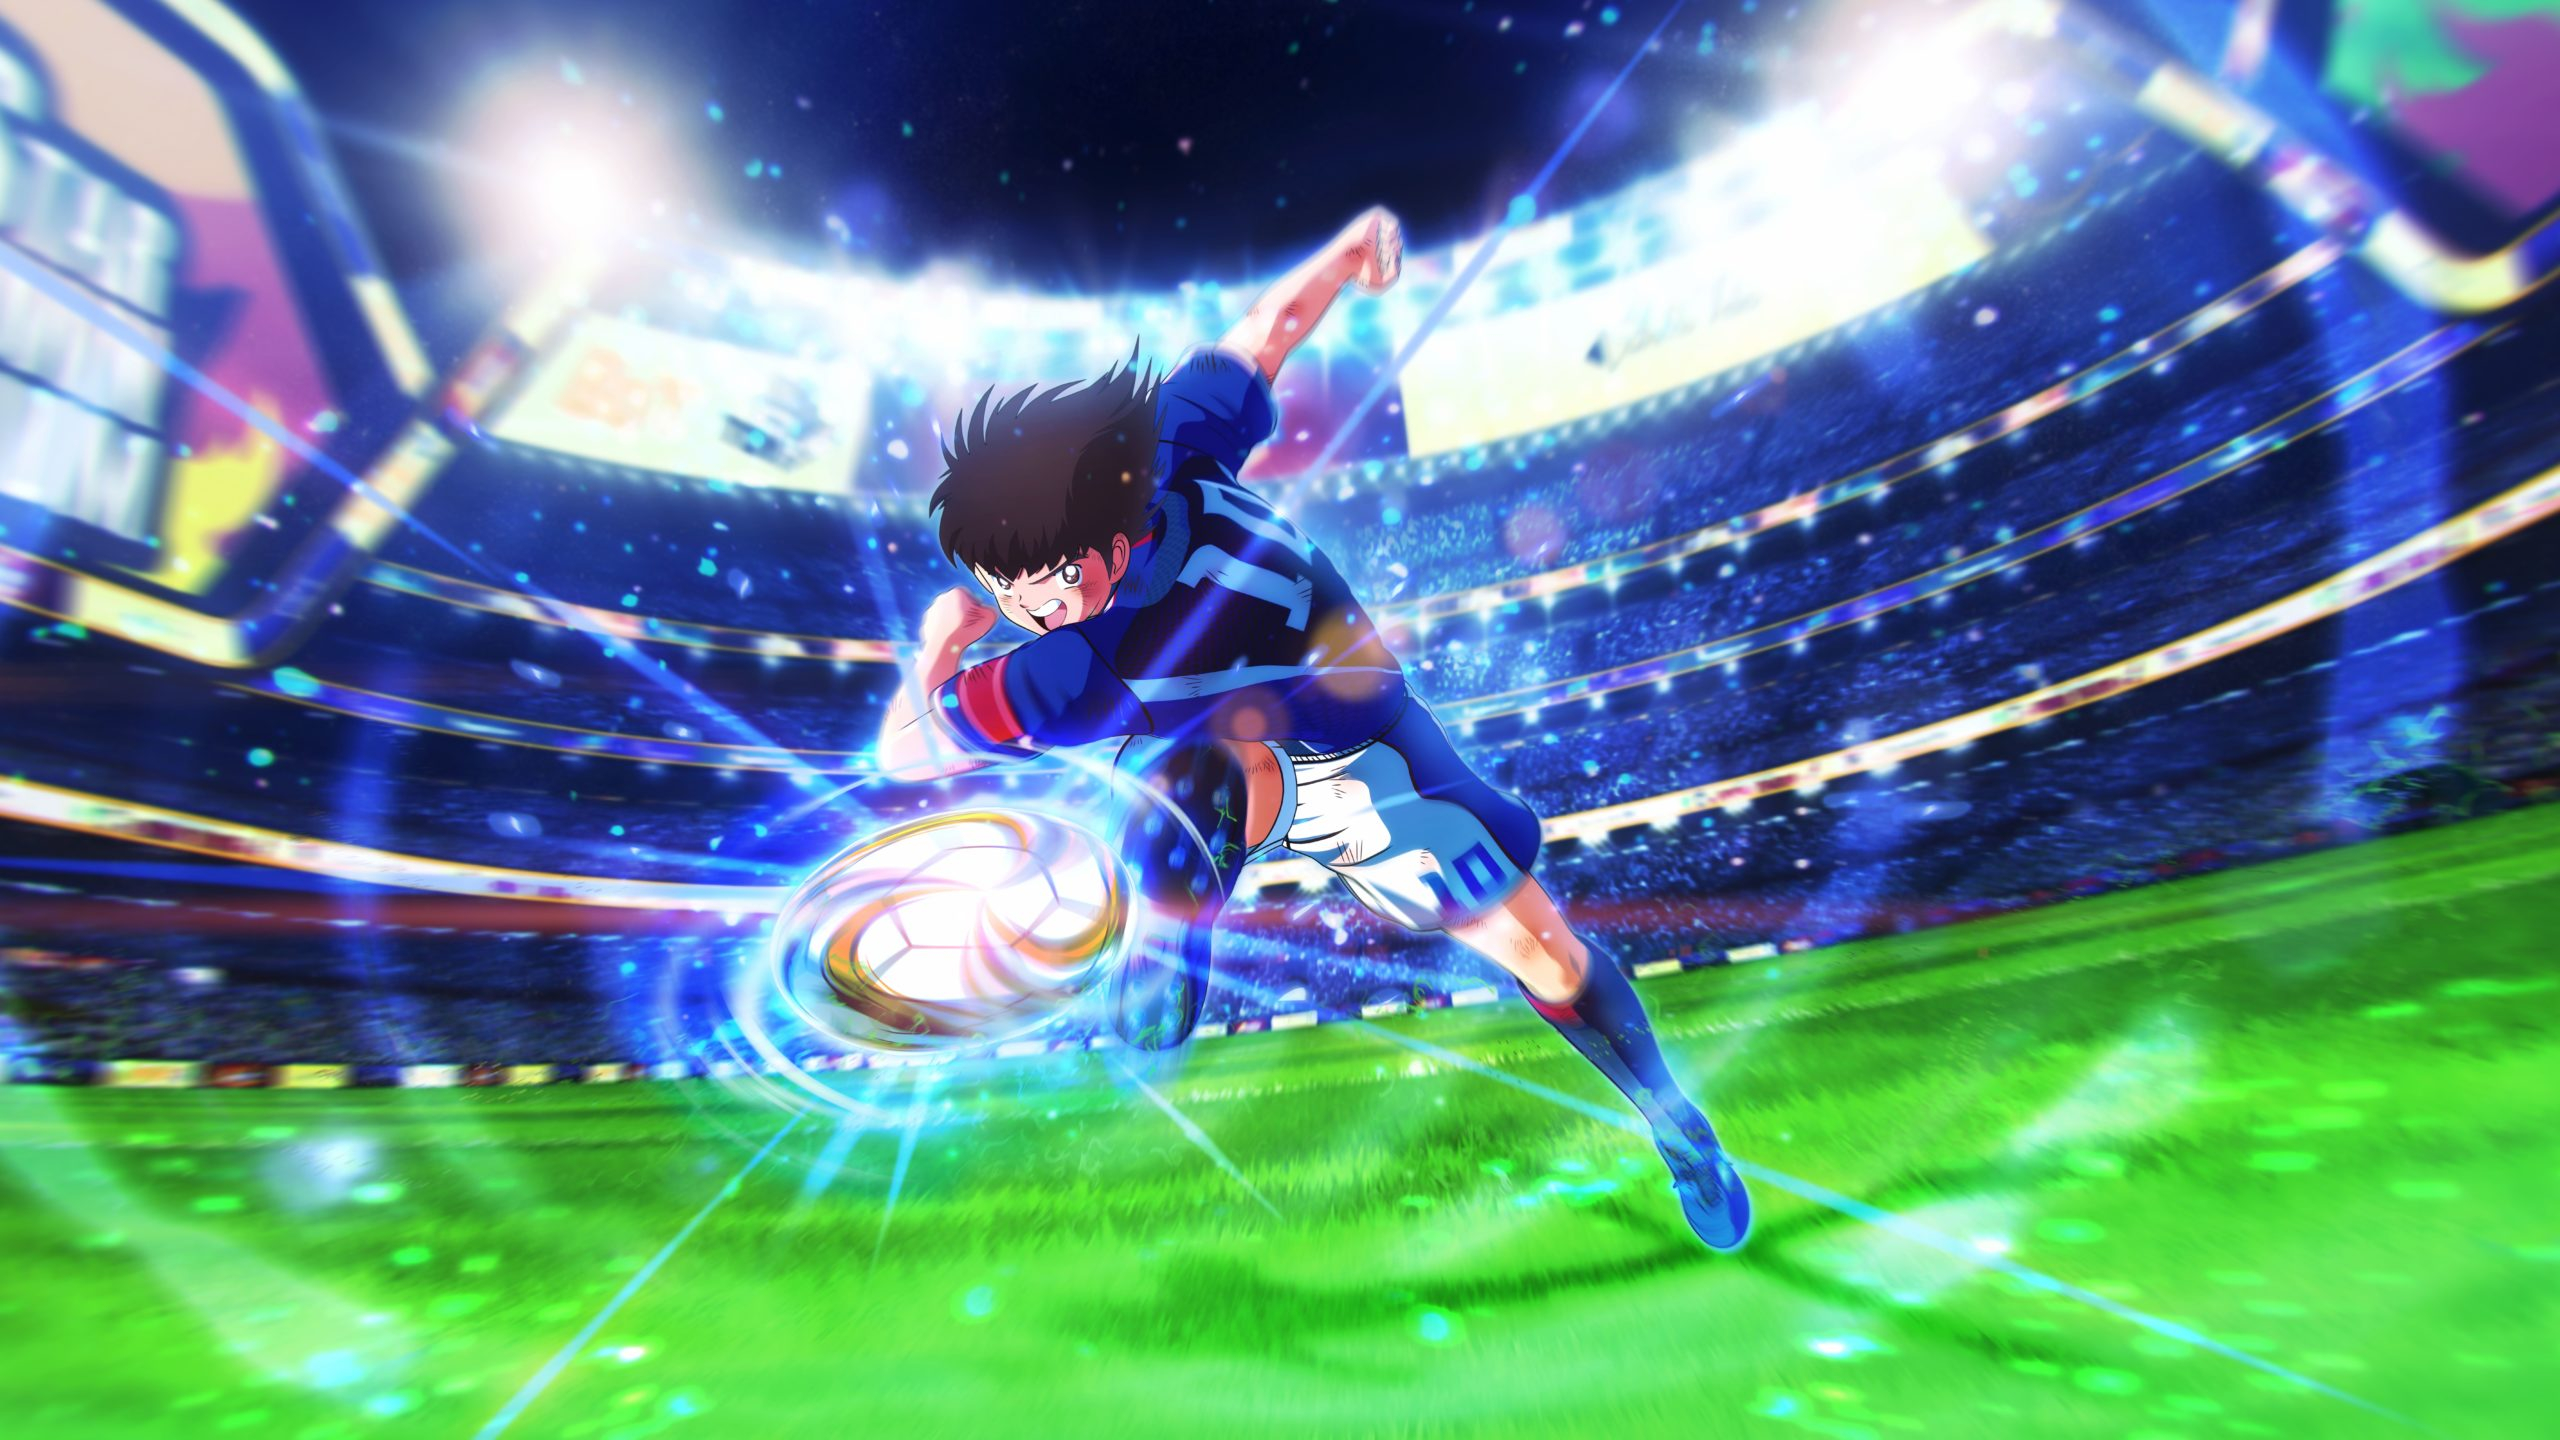 2560x1440 20+ Captain Tsubasa: Rise of New Champions HD Wallpapers and Backgrounds